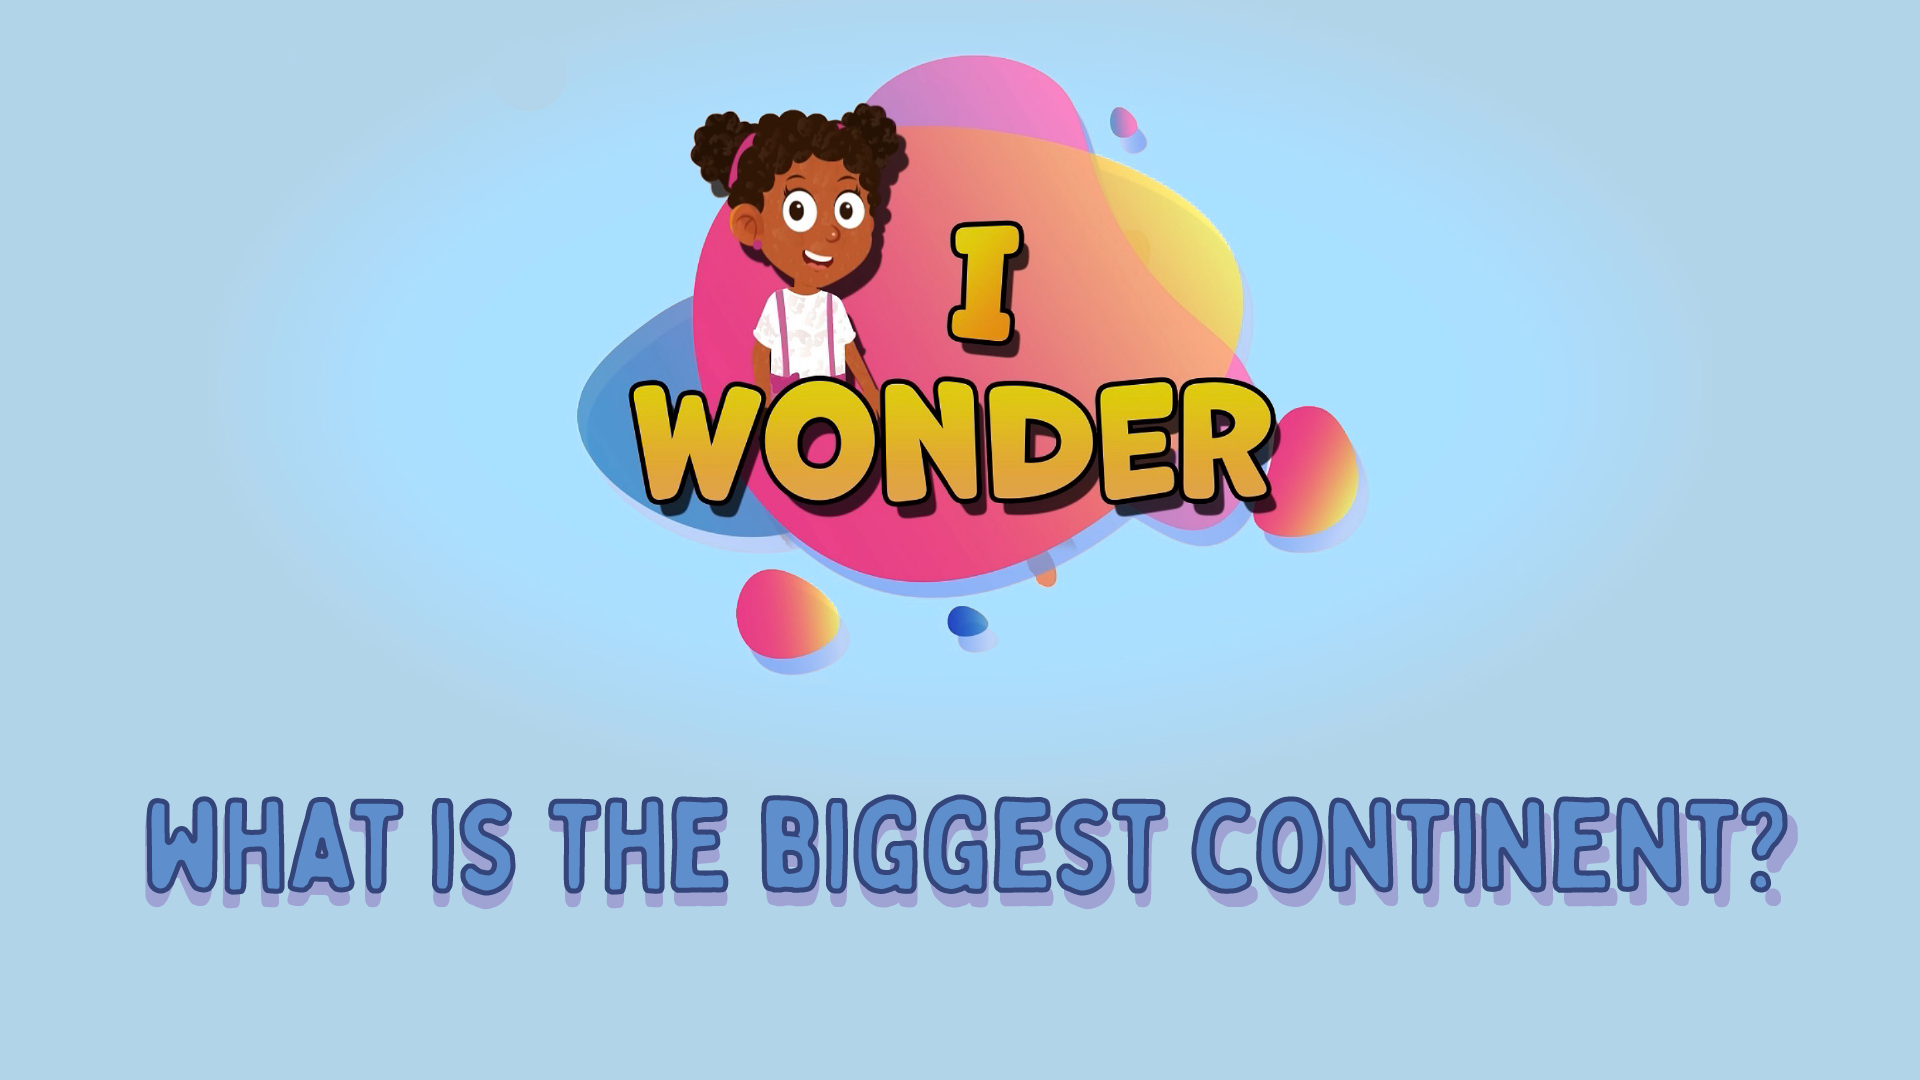 What Is The Biggest Continent?